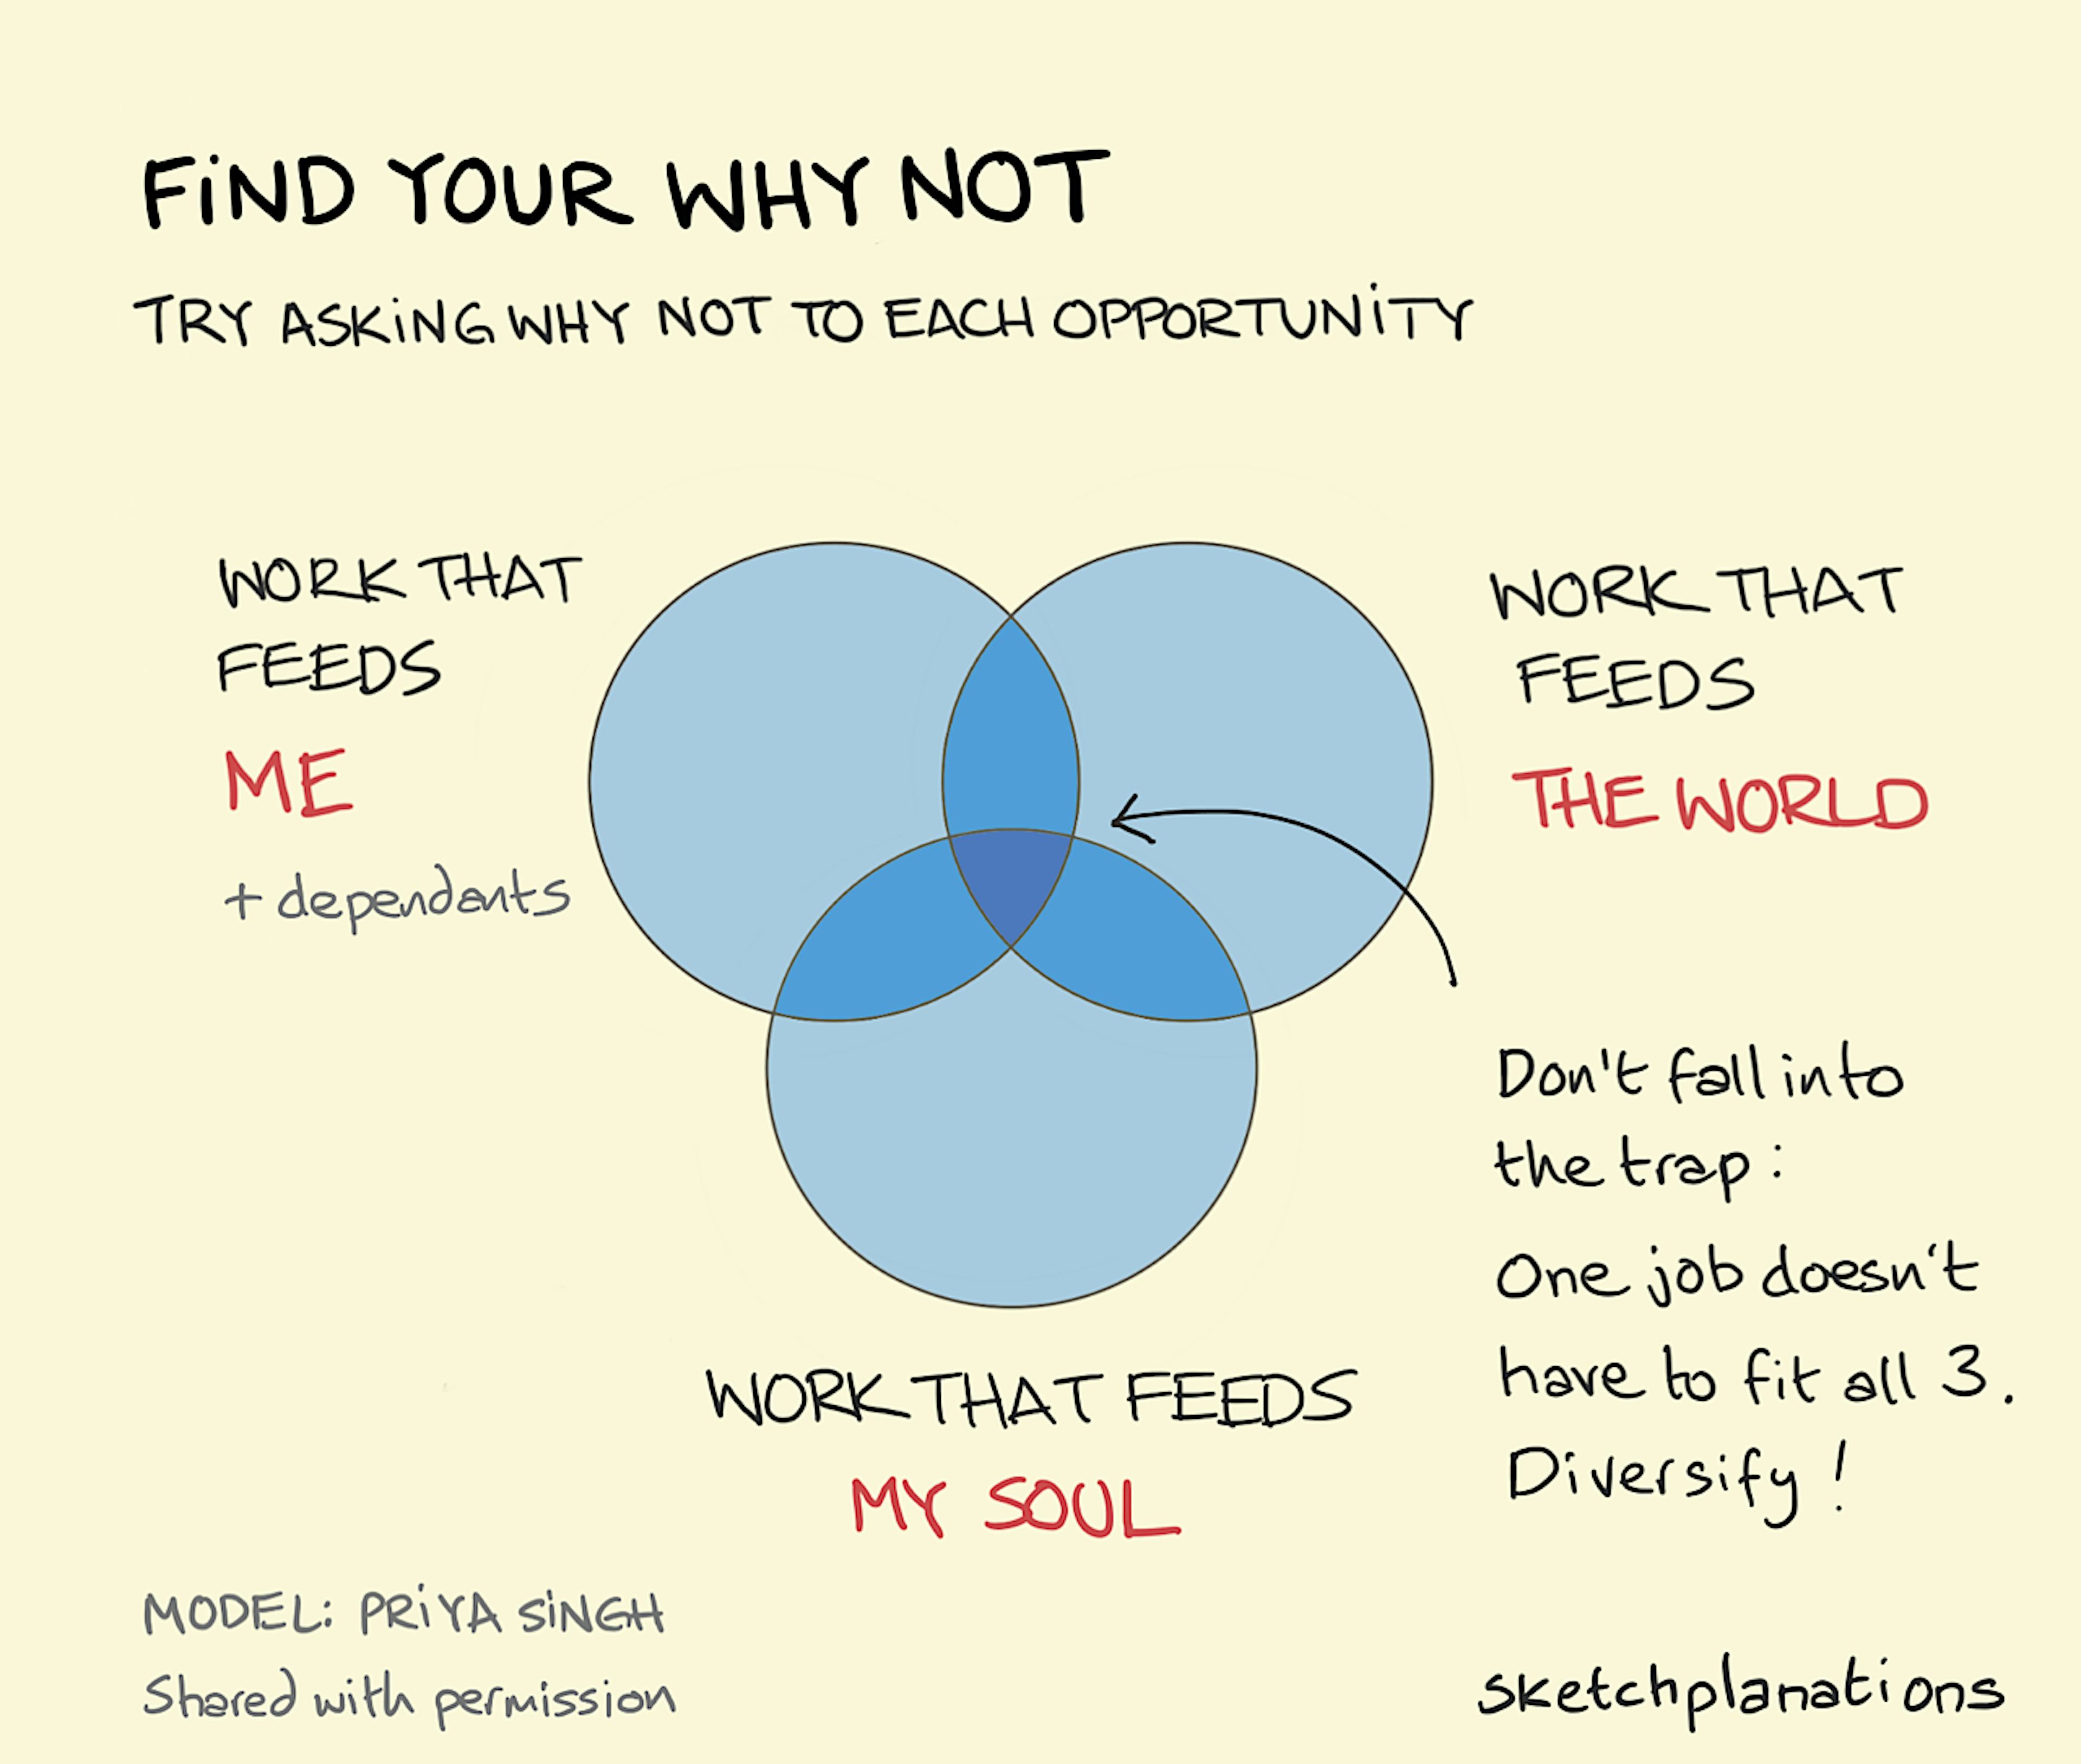 'Find your why not' Venn diagram with 3 equally overlapping circles for different types of work. Work that: feeds you, feeds the world, feeds my soul. You don't have to aim for the centre.